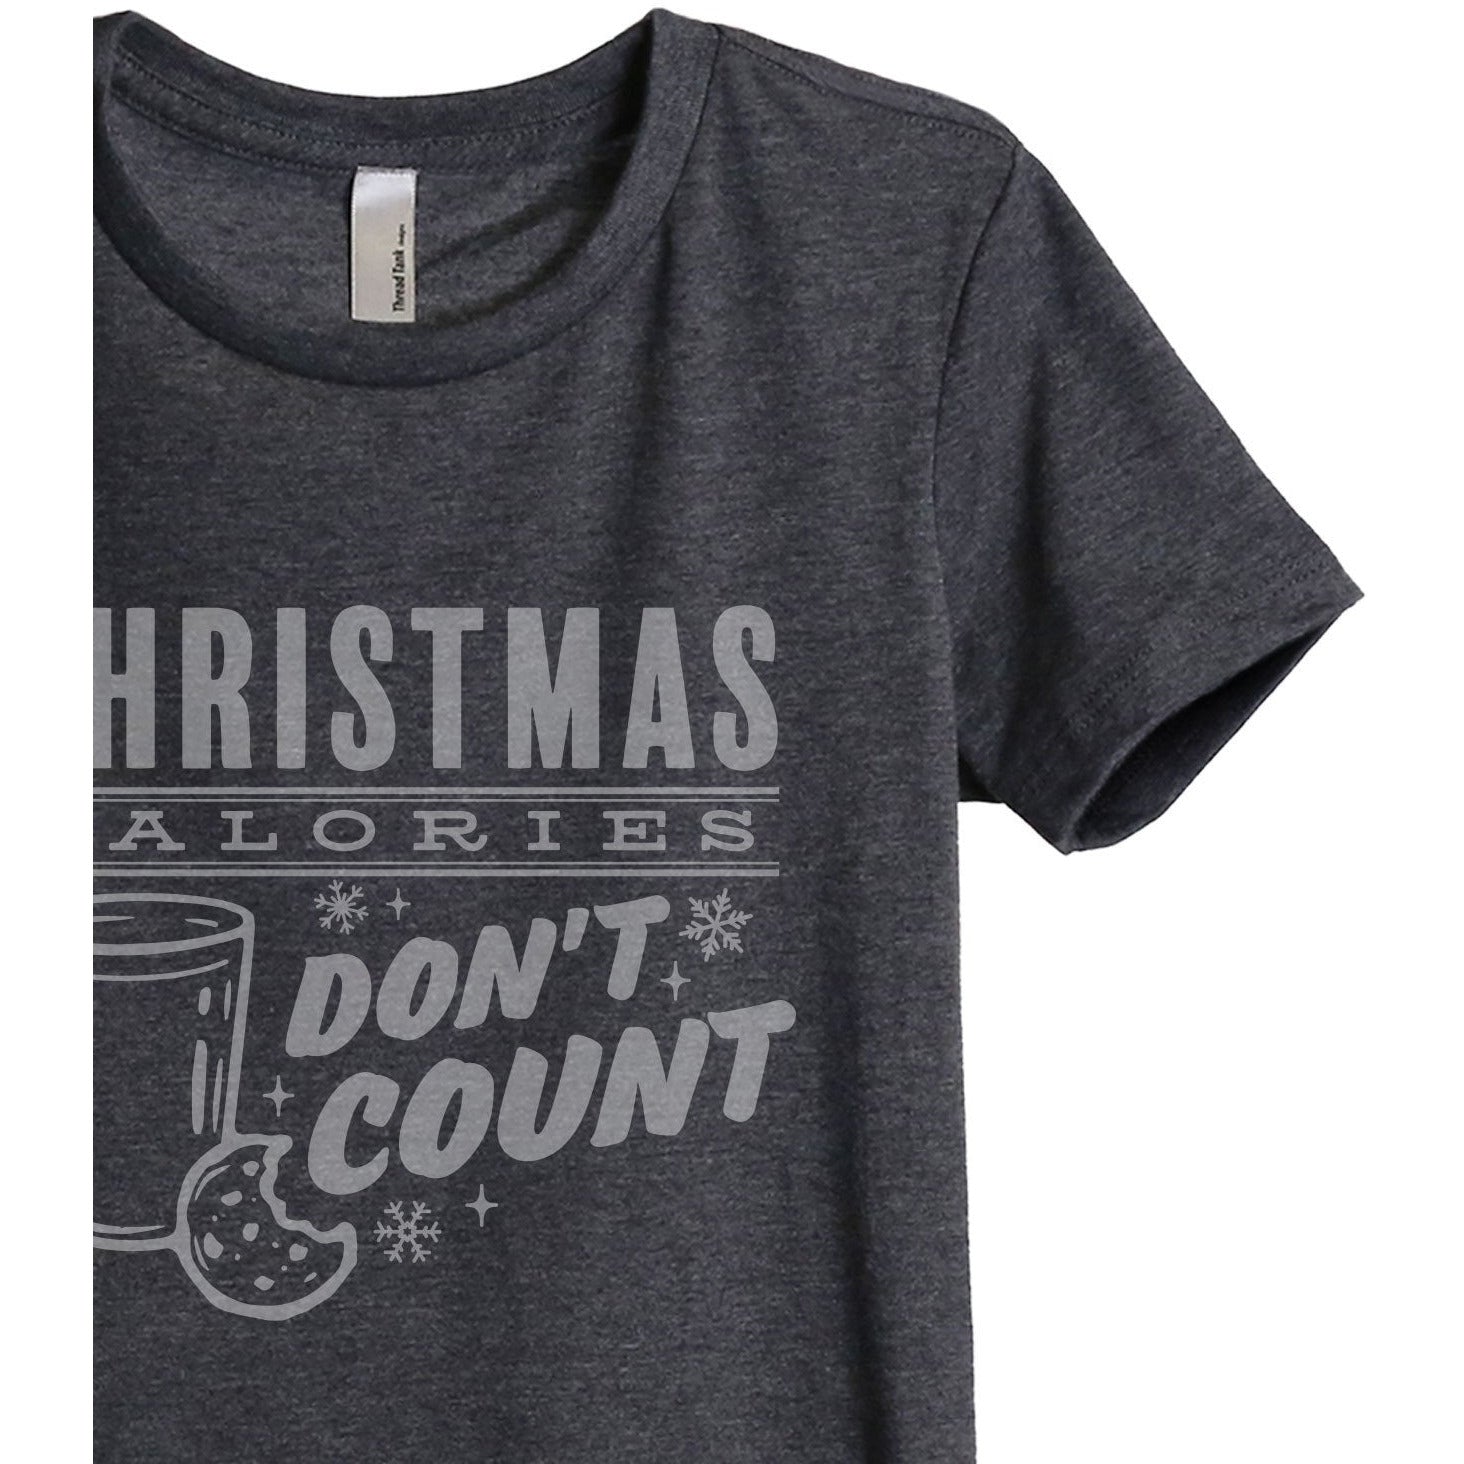 Christmas Calories Don't Count Women's Relaxed Crewneck T-Shirt Top Tee Charcoal Grey Zoom Details